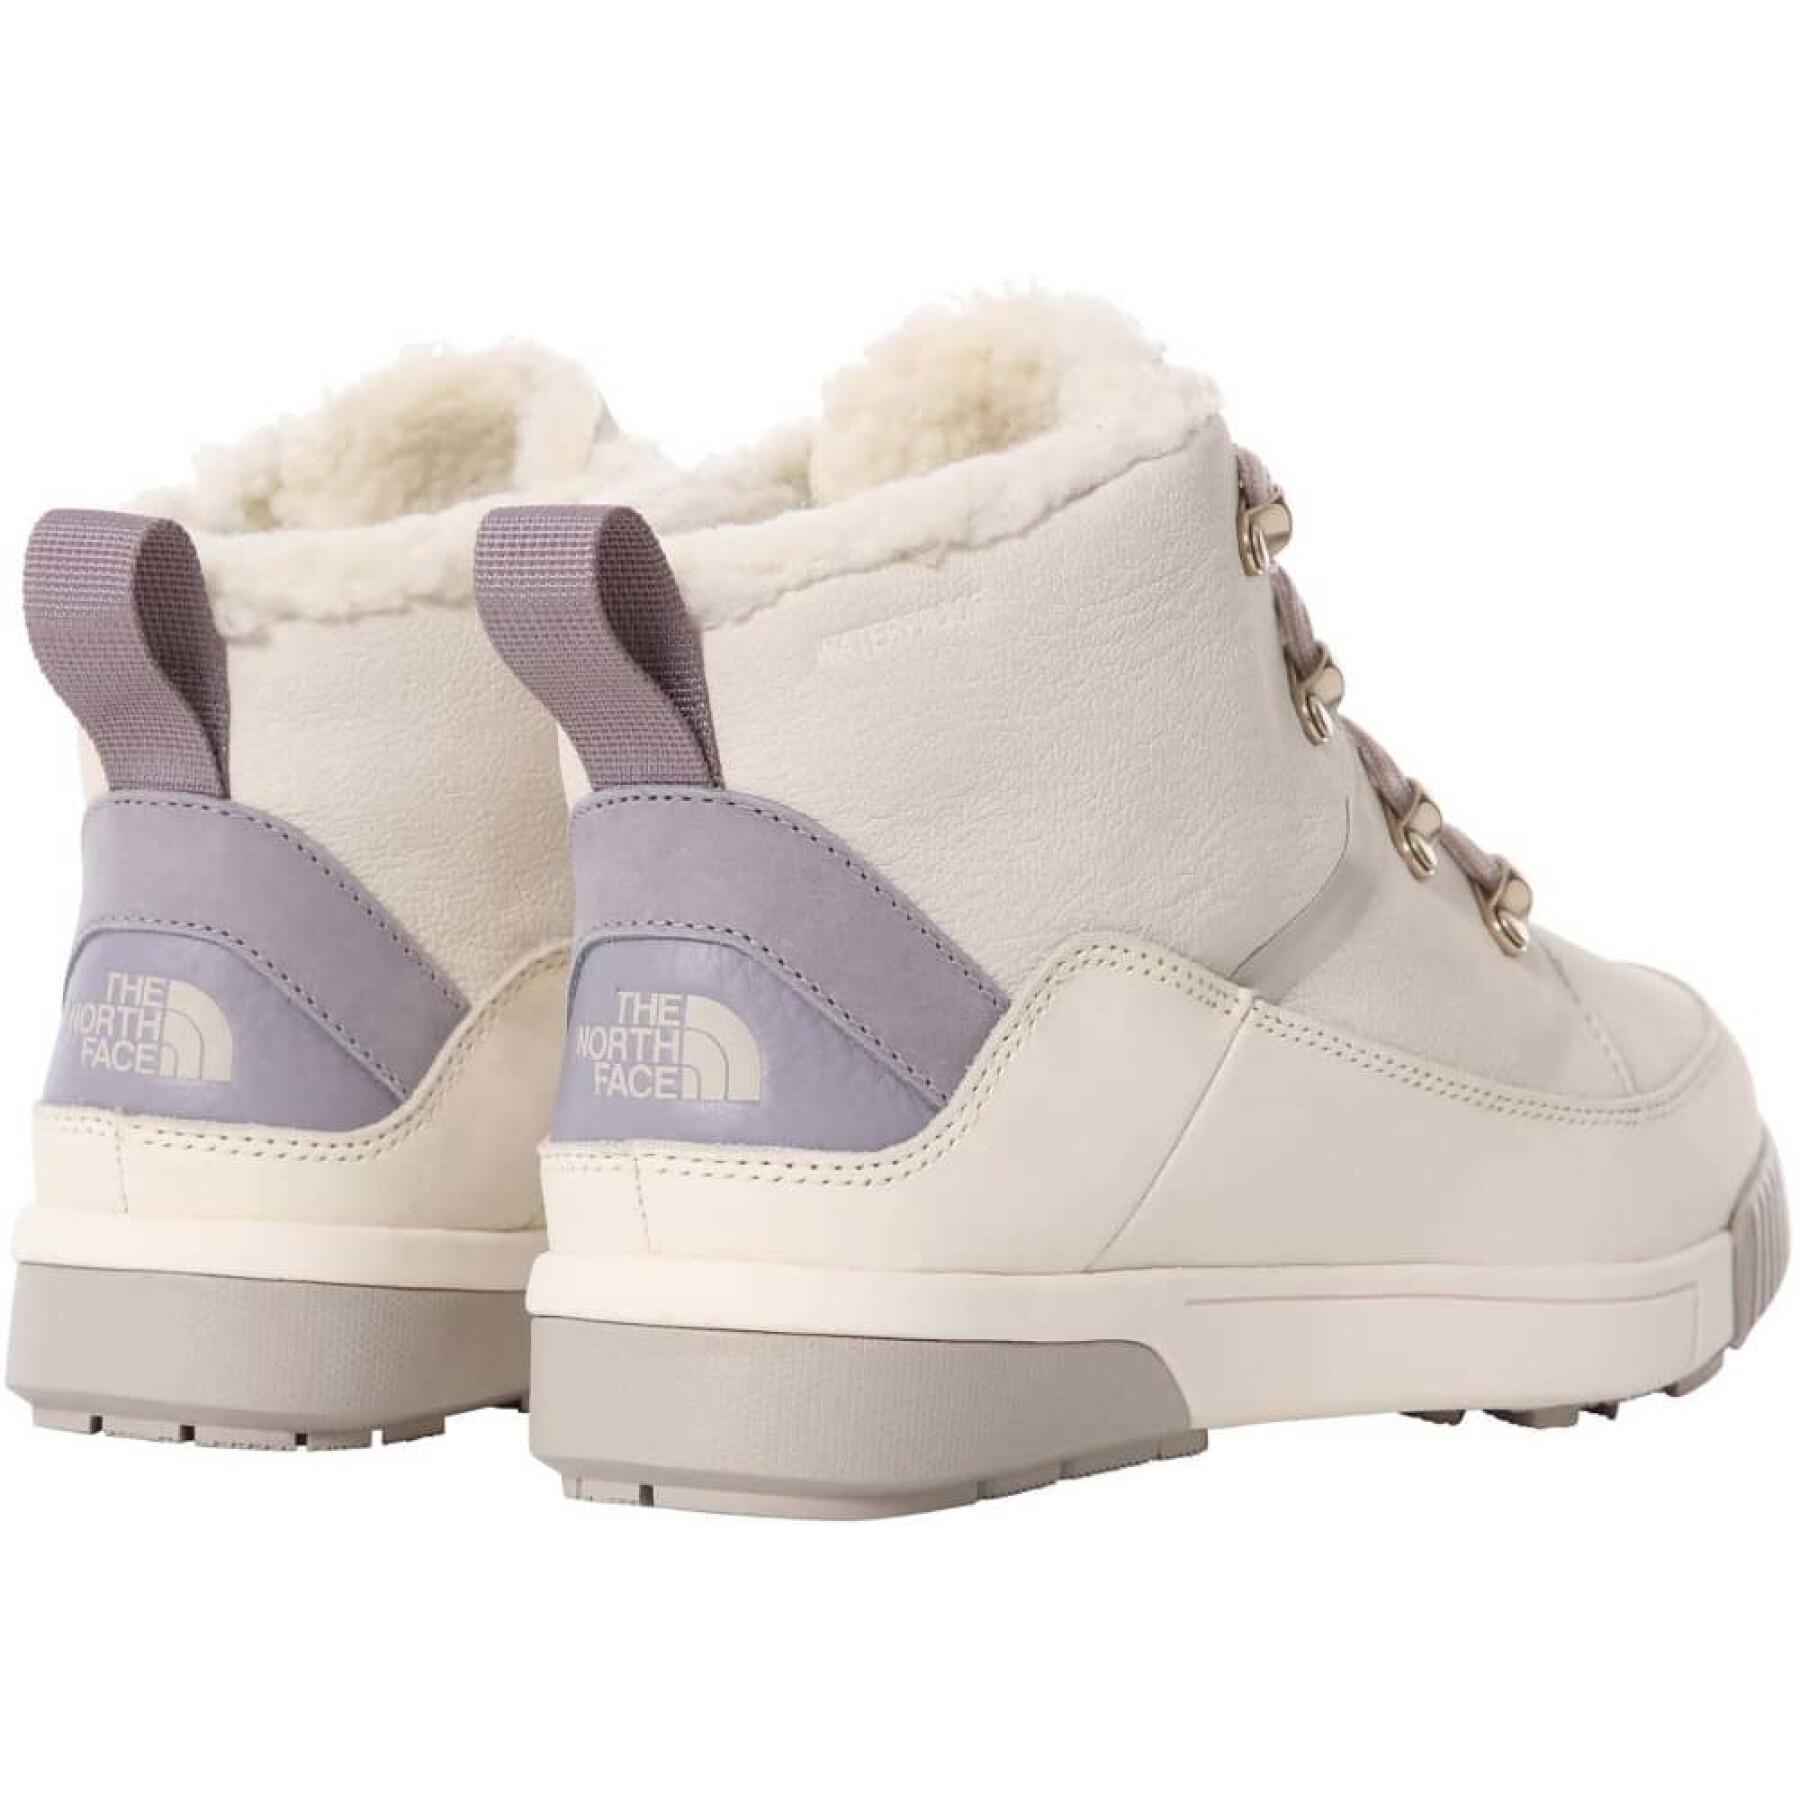 Buty damskie The North Face Sierra mid lace